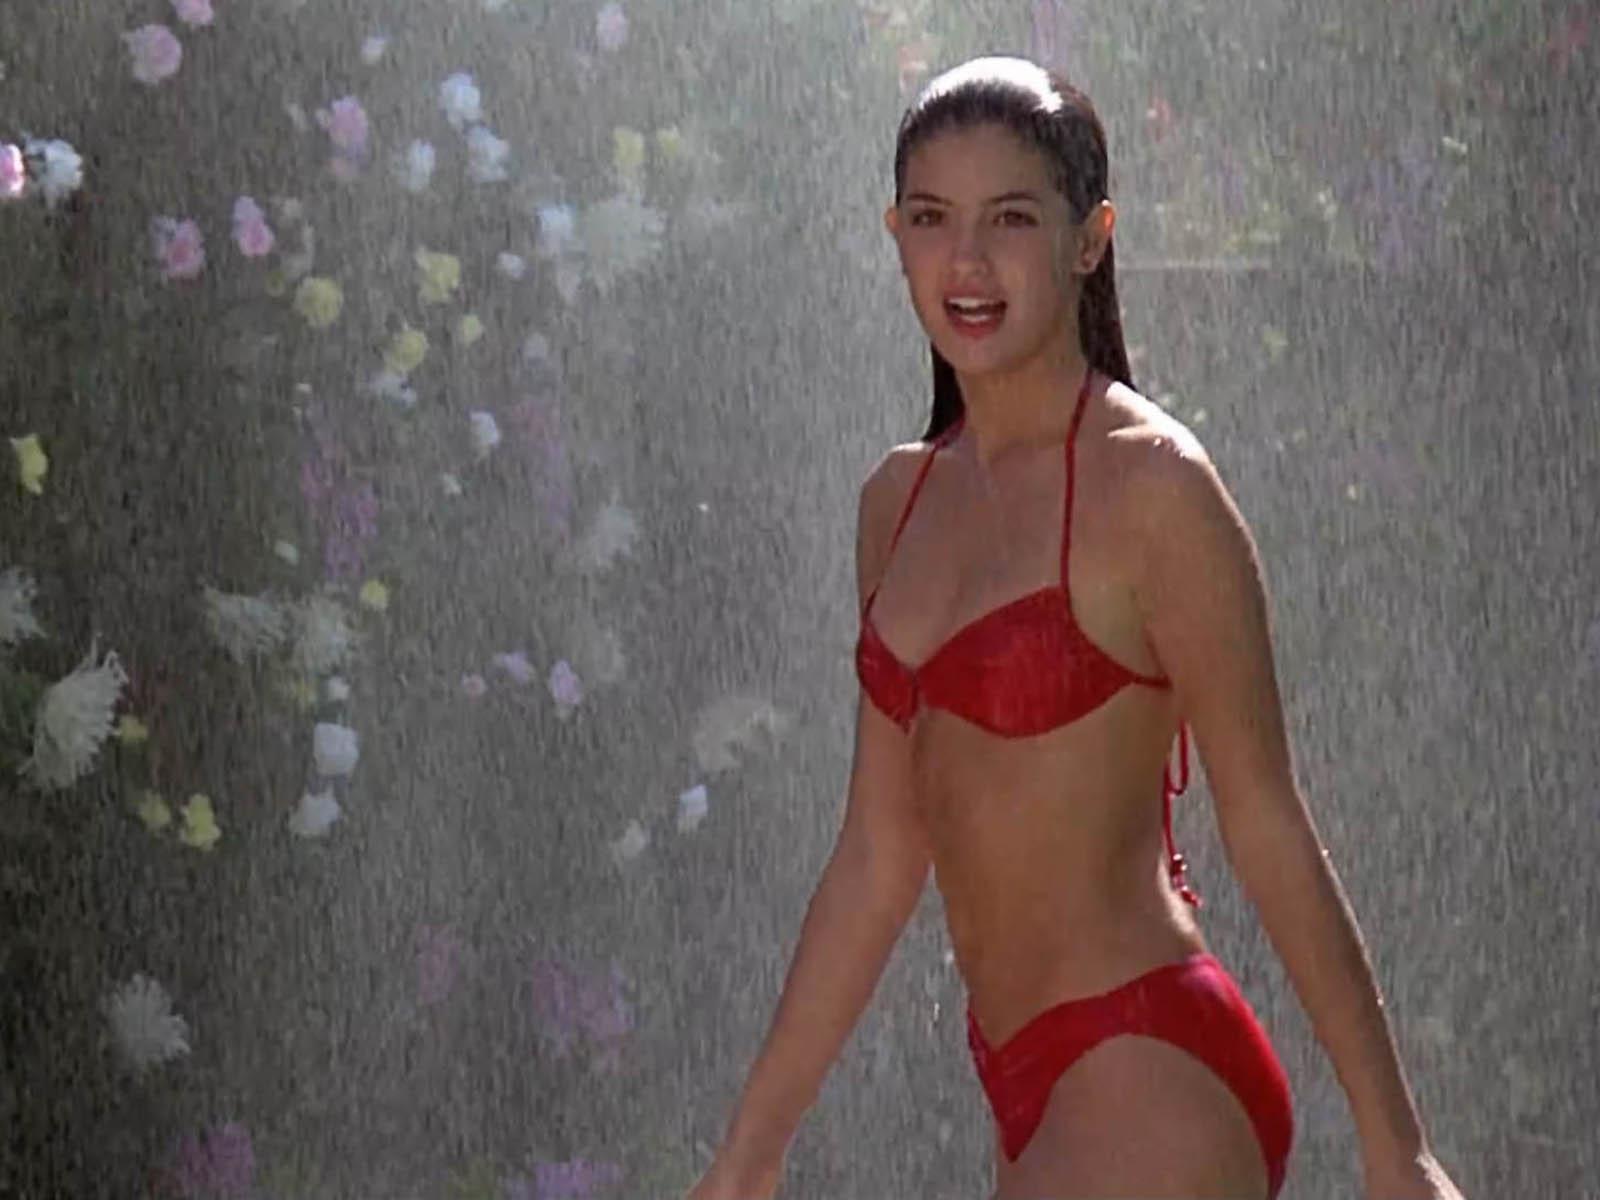 Phoebe Cates in  Fast Times at Ridgemont High